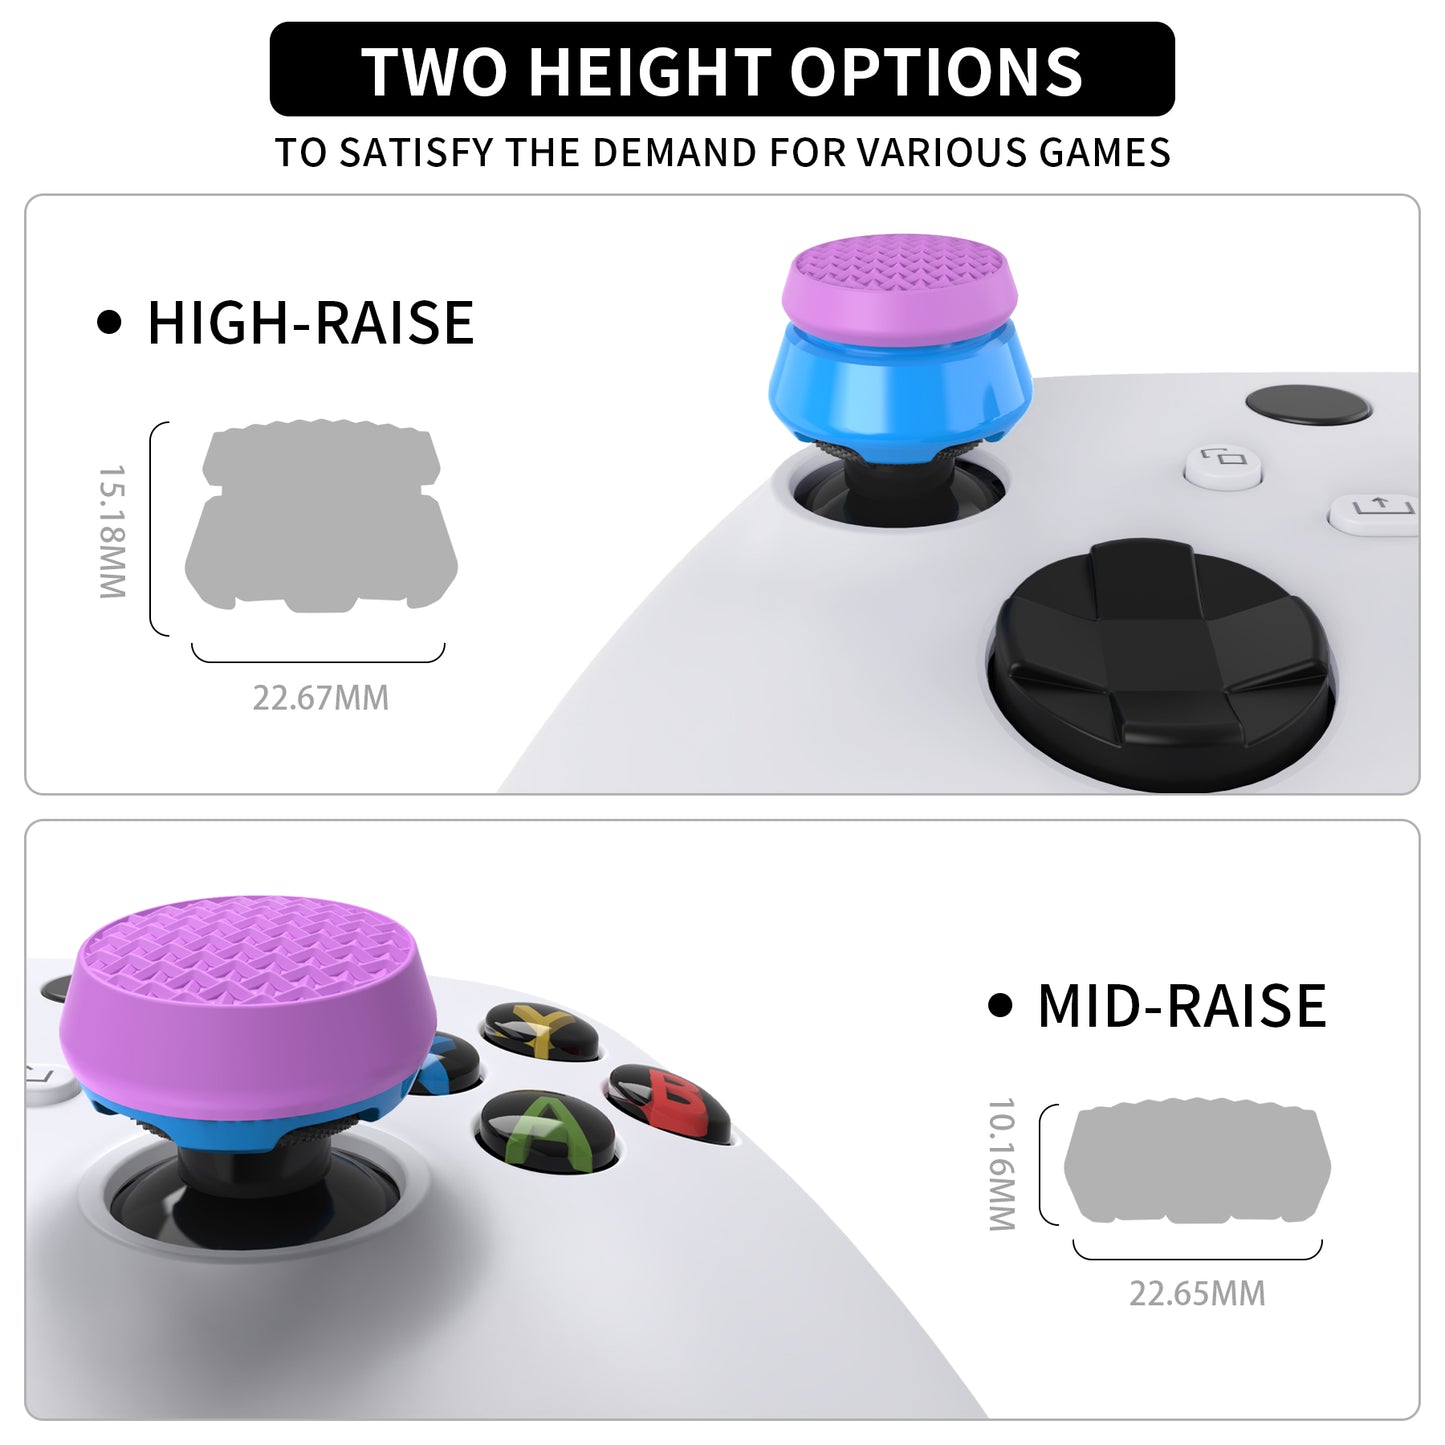 PlayVital Thumbs Pro ARMOR Thumbstick Extender for Xbox Core Controller, for Xbox Series X/S Controller, Joystick Caps Grip for Xbox One Controller - 2 High Raise and 2 Mid Raise Dome - Orchid Purple & Heaven Blue - PJM5004 PlayVital